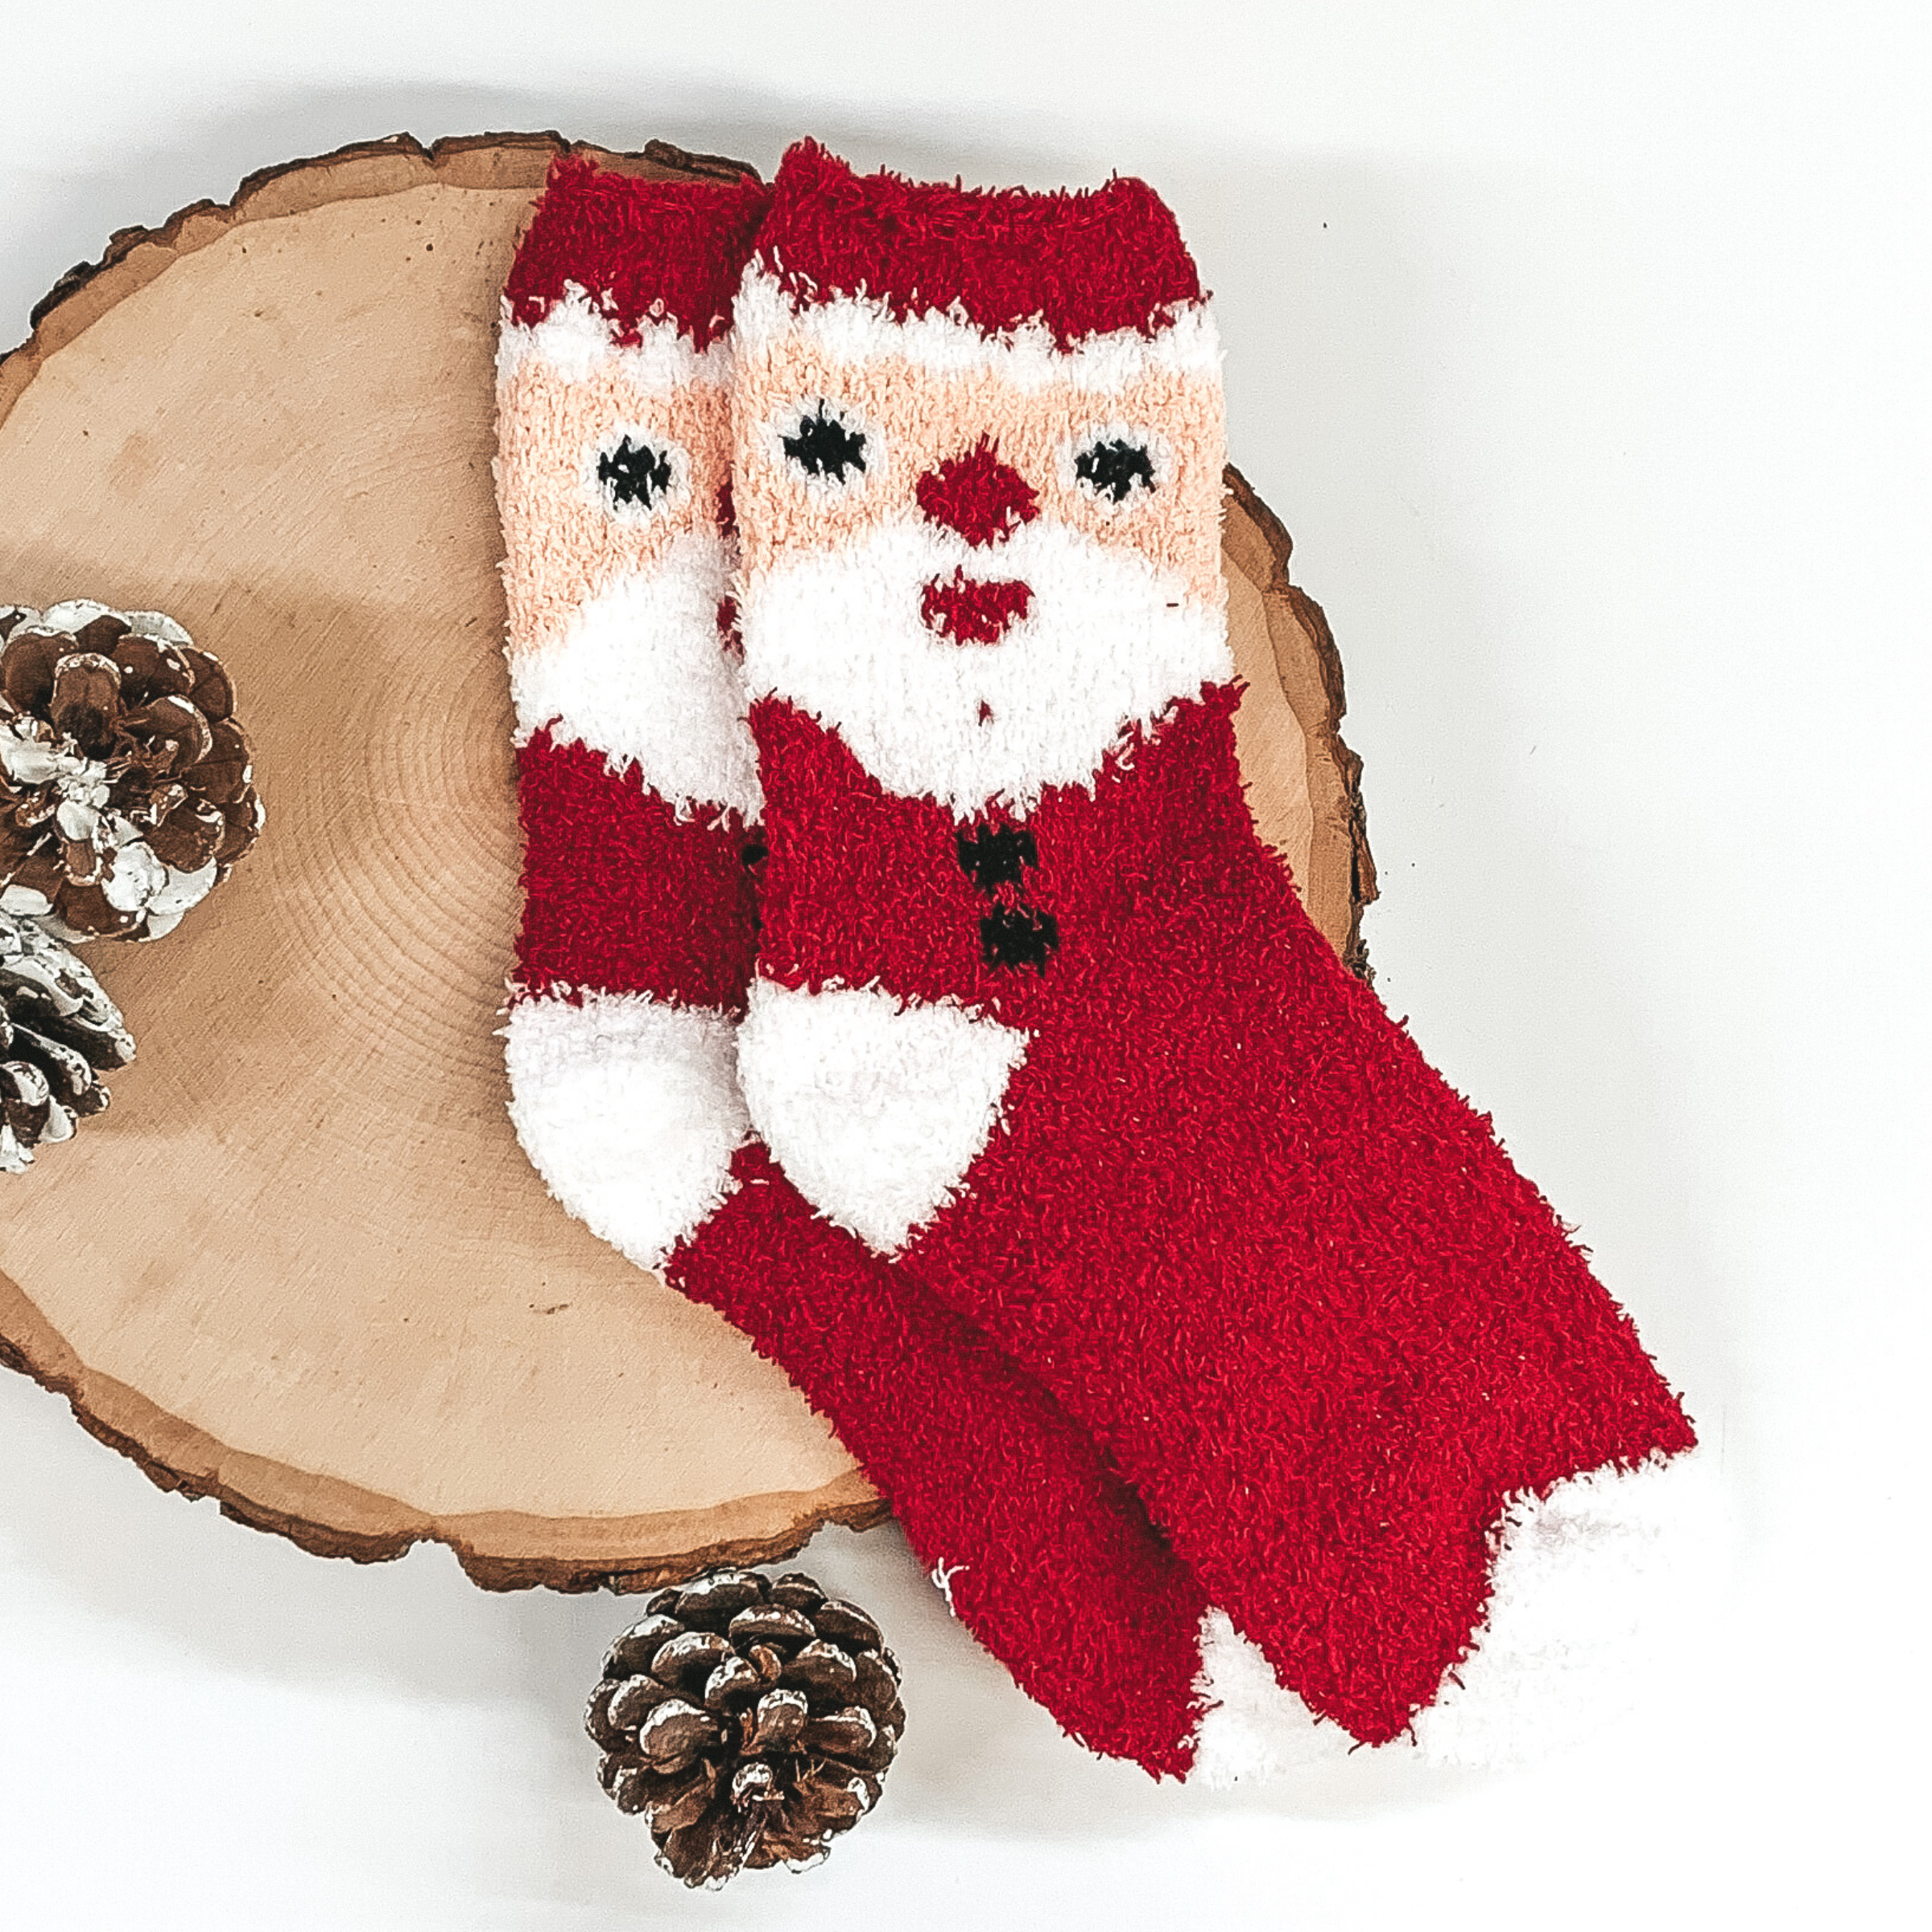 Fuzzy red socks with a colored santa face on the ankle part of the socks. These socks are pictured laying on a piece of wood that is on a white background.